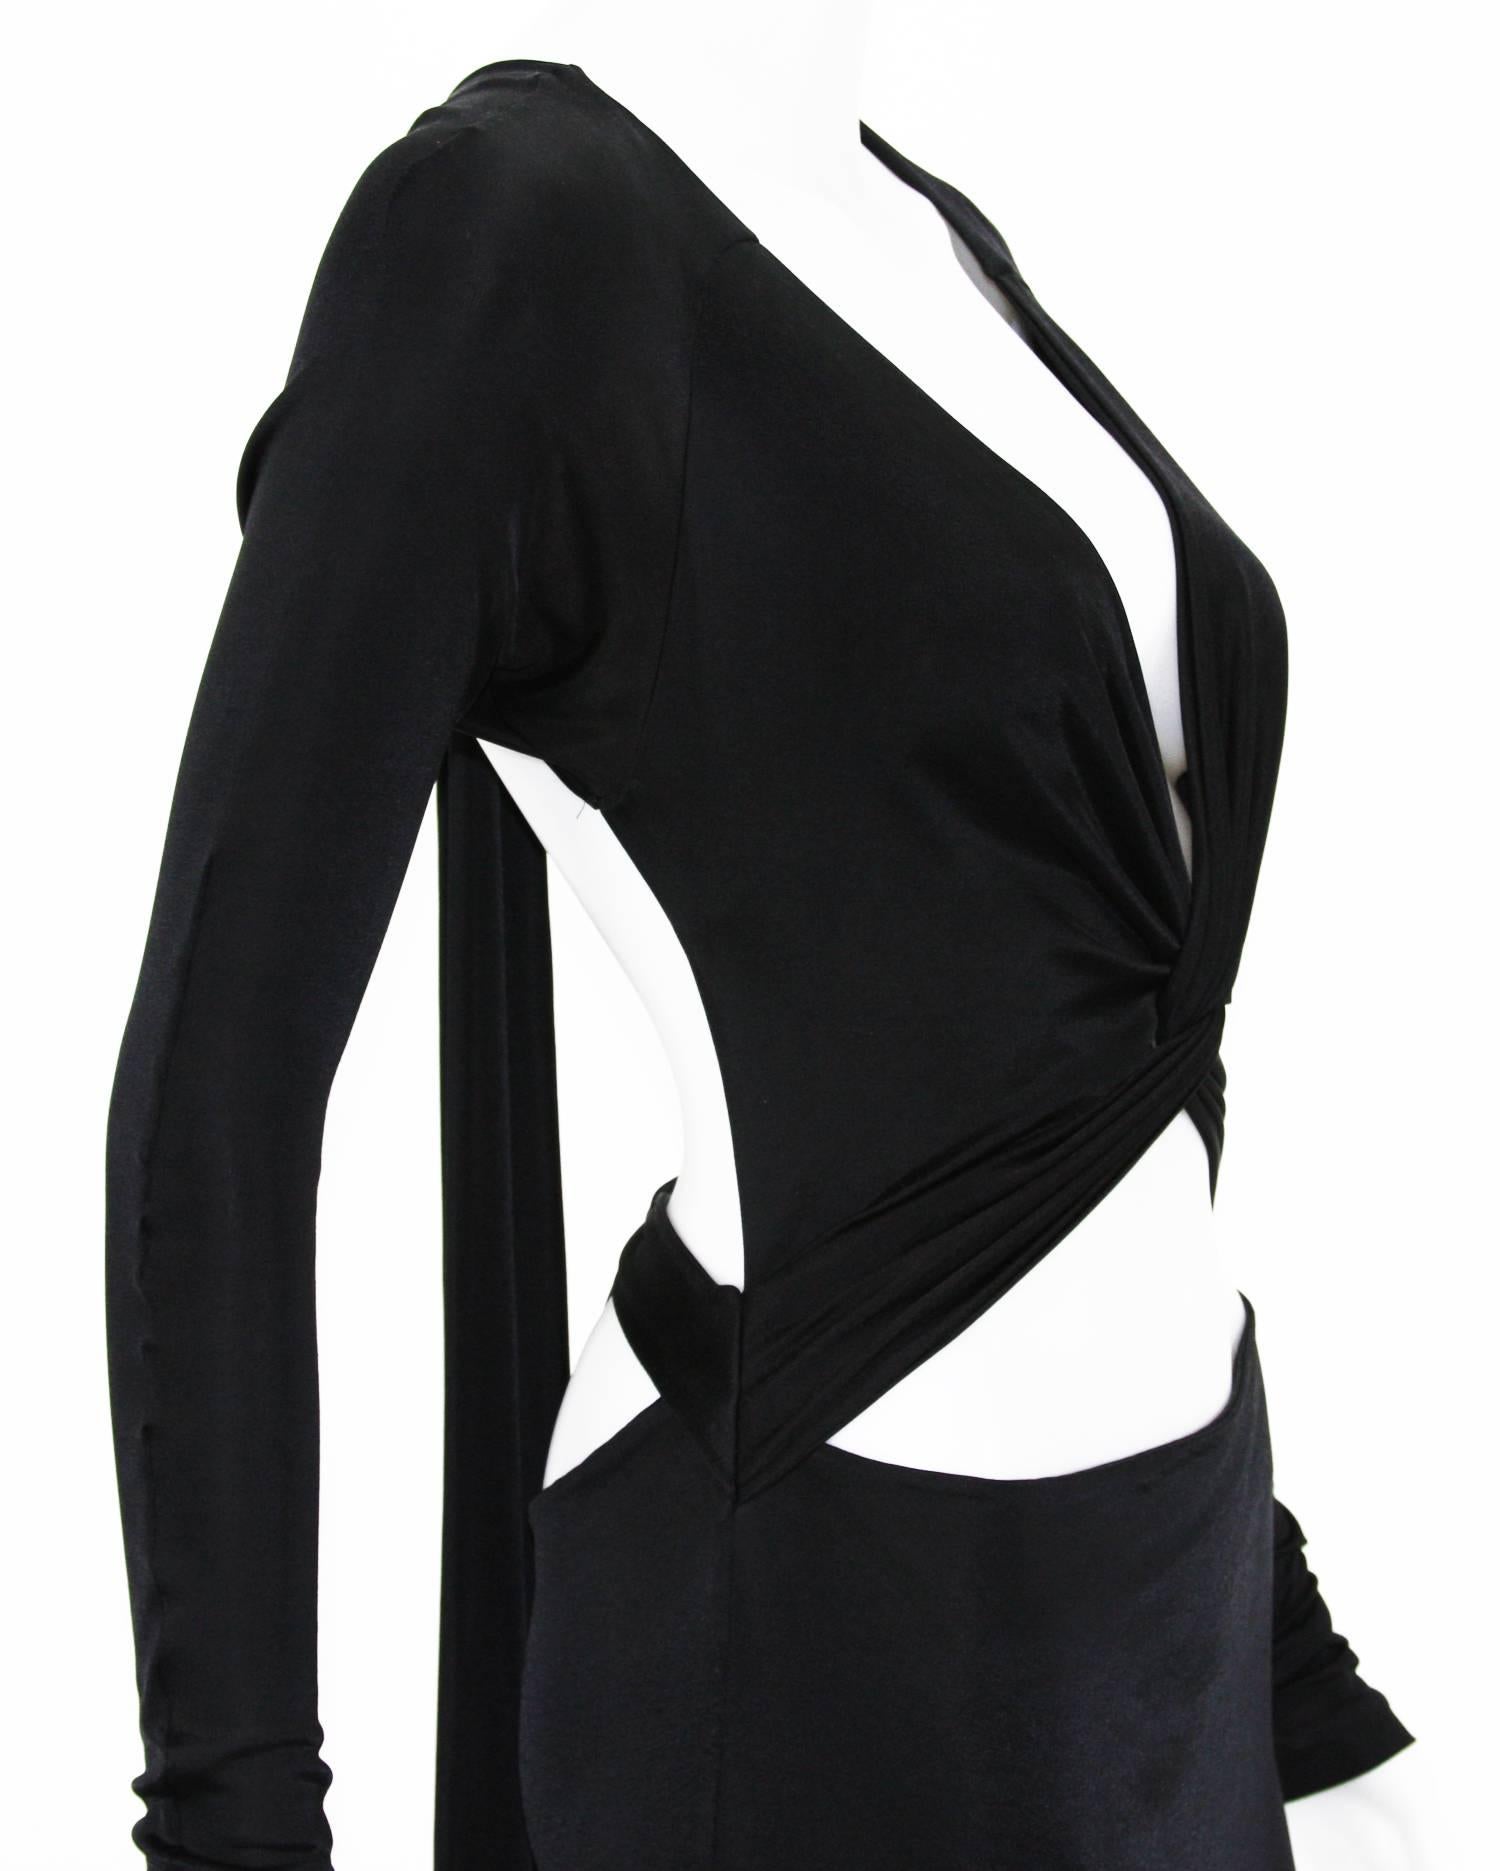 Tom Ford for Gucci Sexy Cut Out Jersey Black Cocktail Dress M, 1990s 3